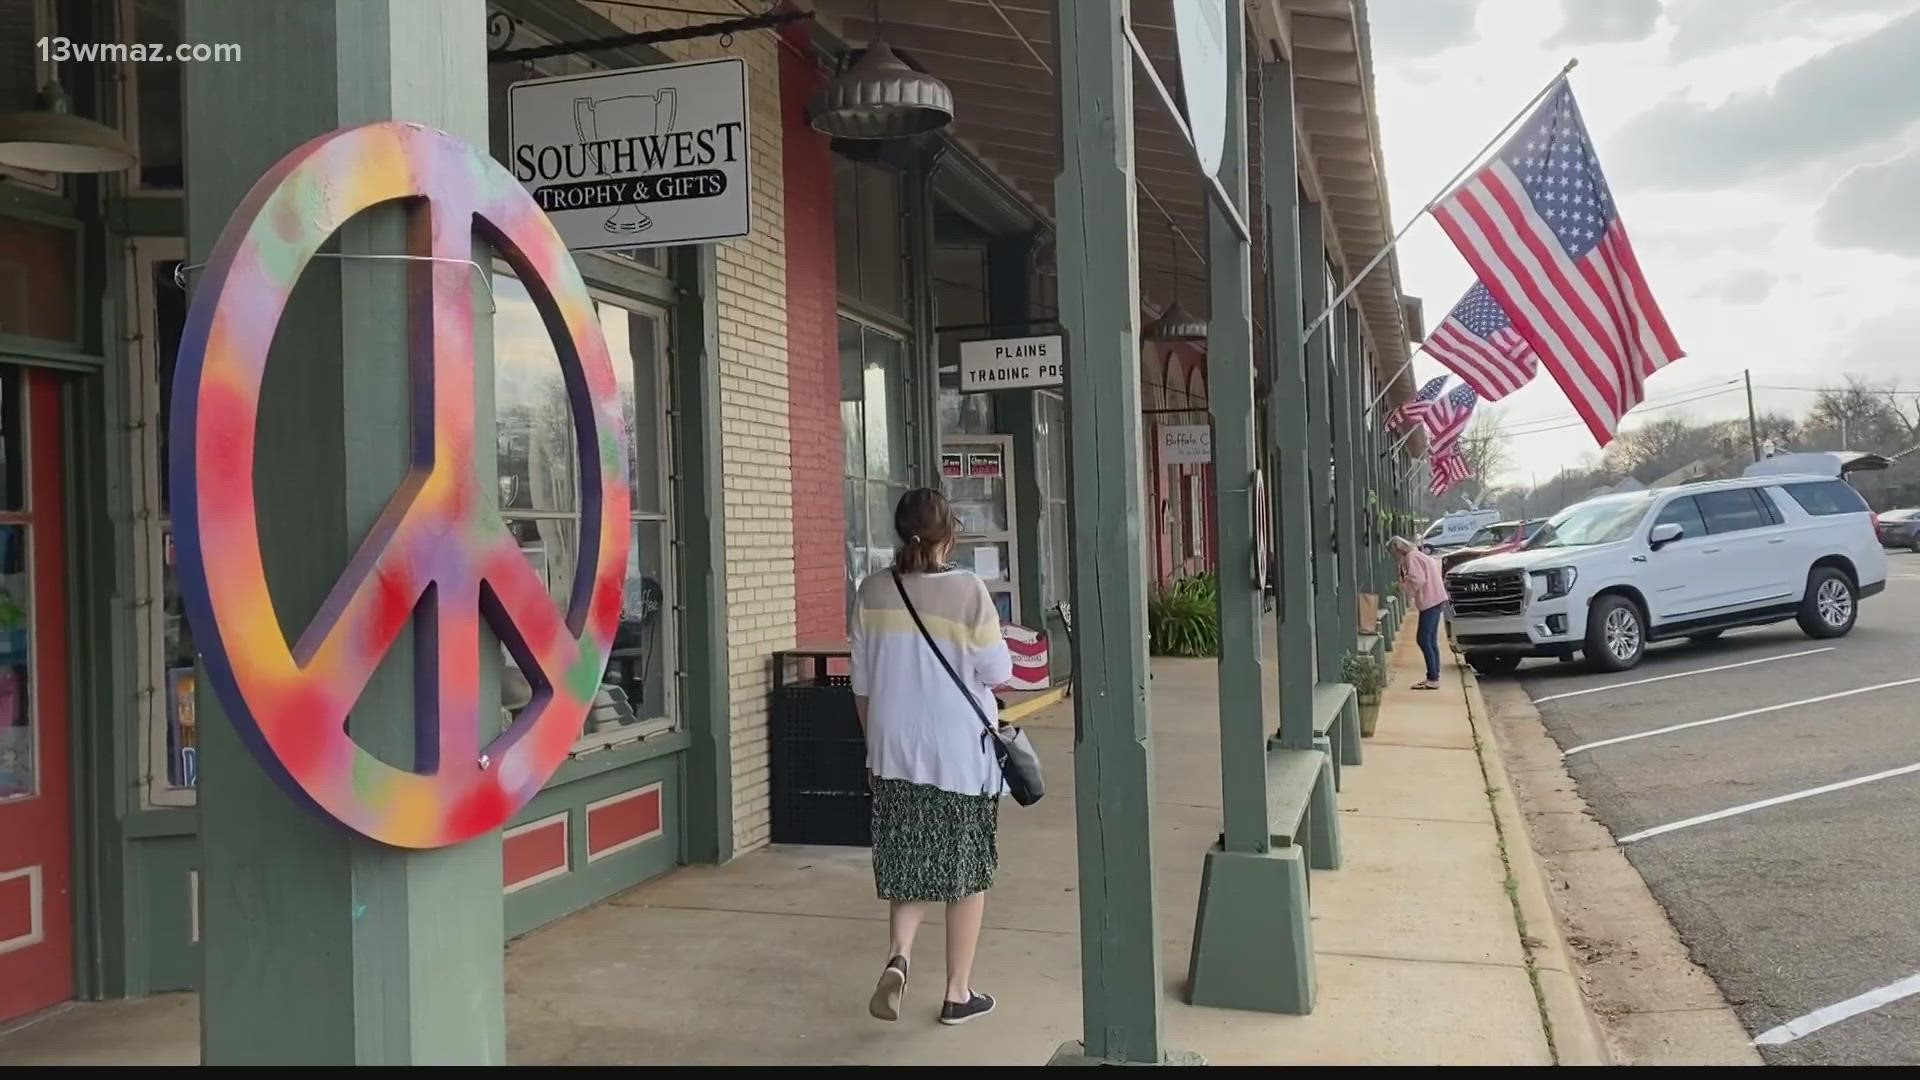 Leanne Smith says she hopes the symbols remind people of Jimmy Carter's push for peace.